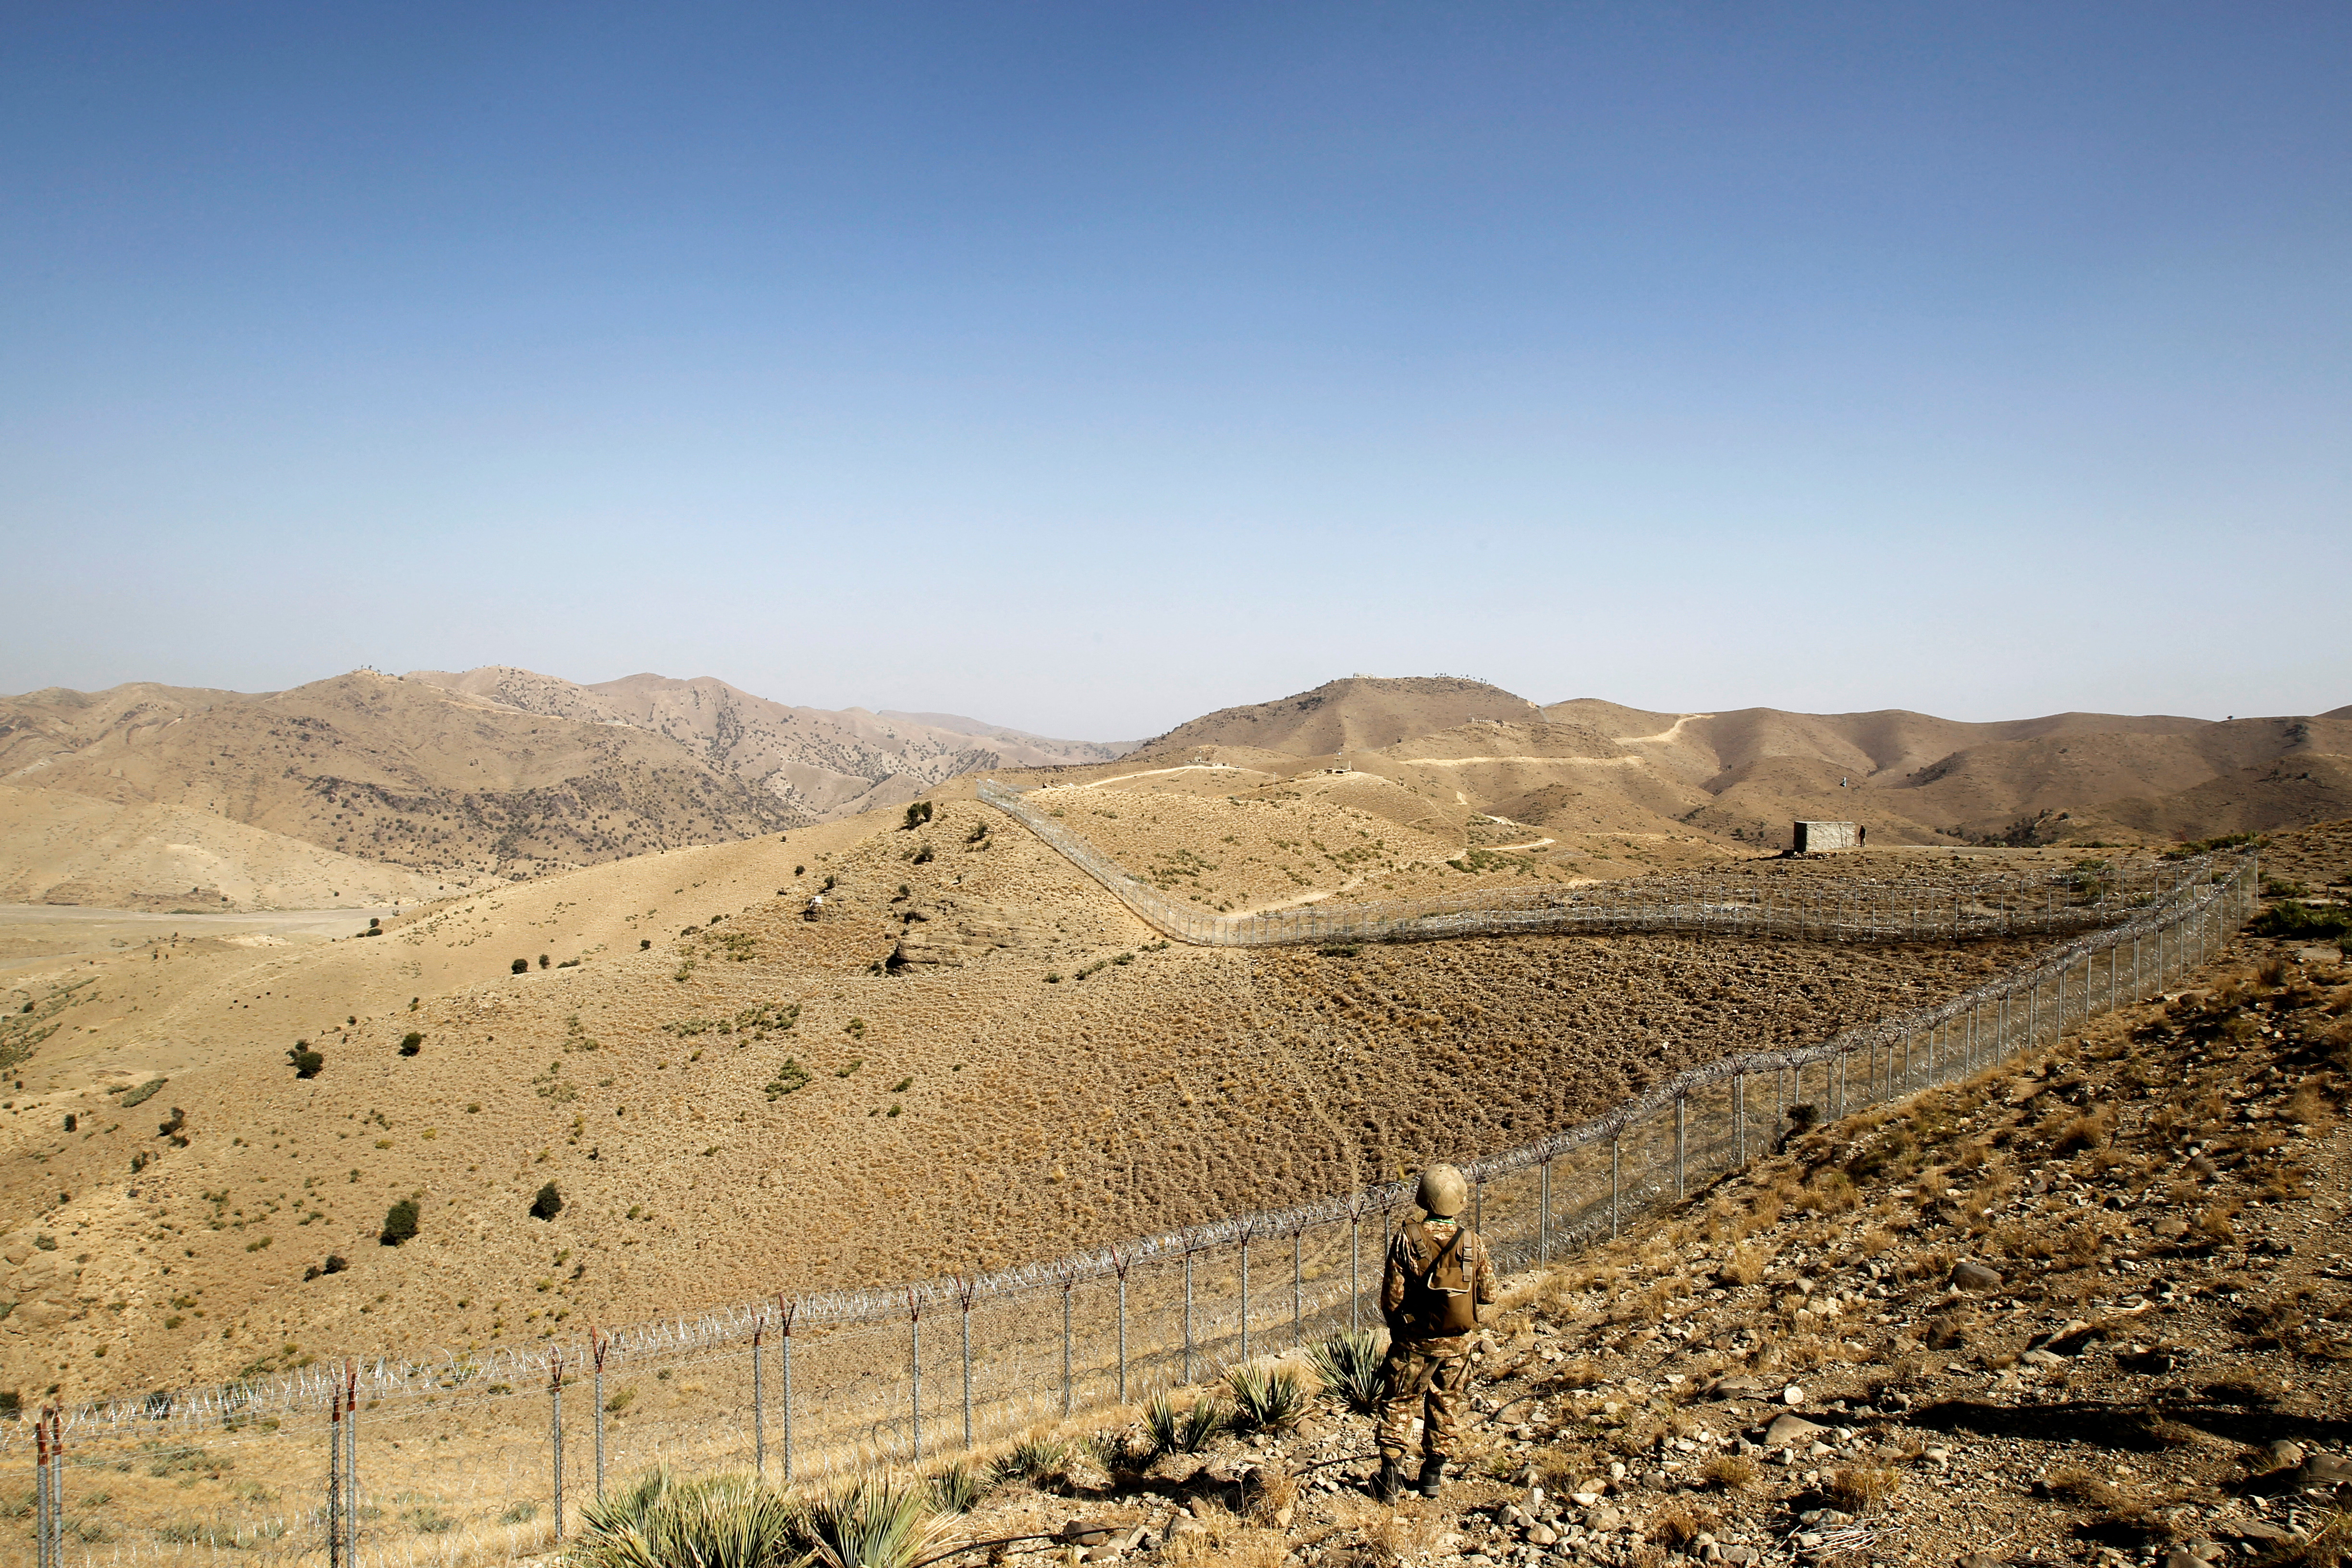 A soldier stands guard along the border fence outside the Kitton outpost on the border with Afghanistan in North Waziristan